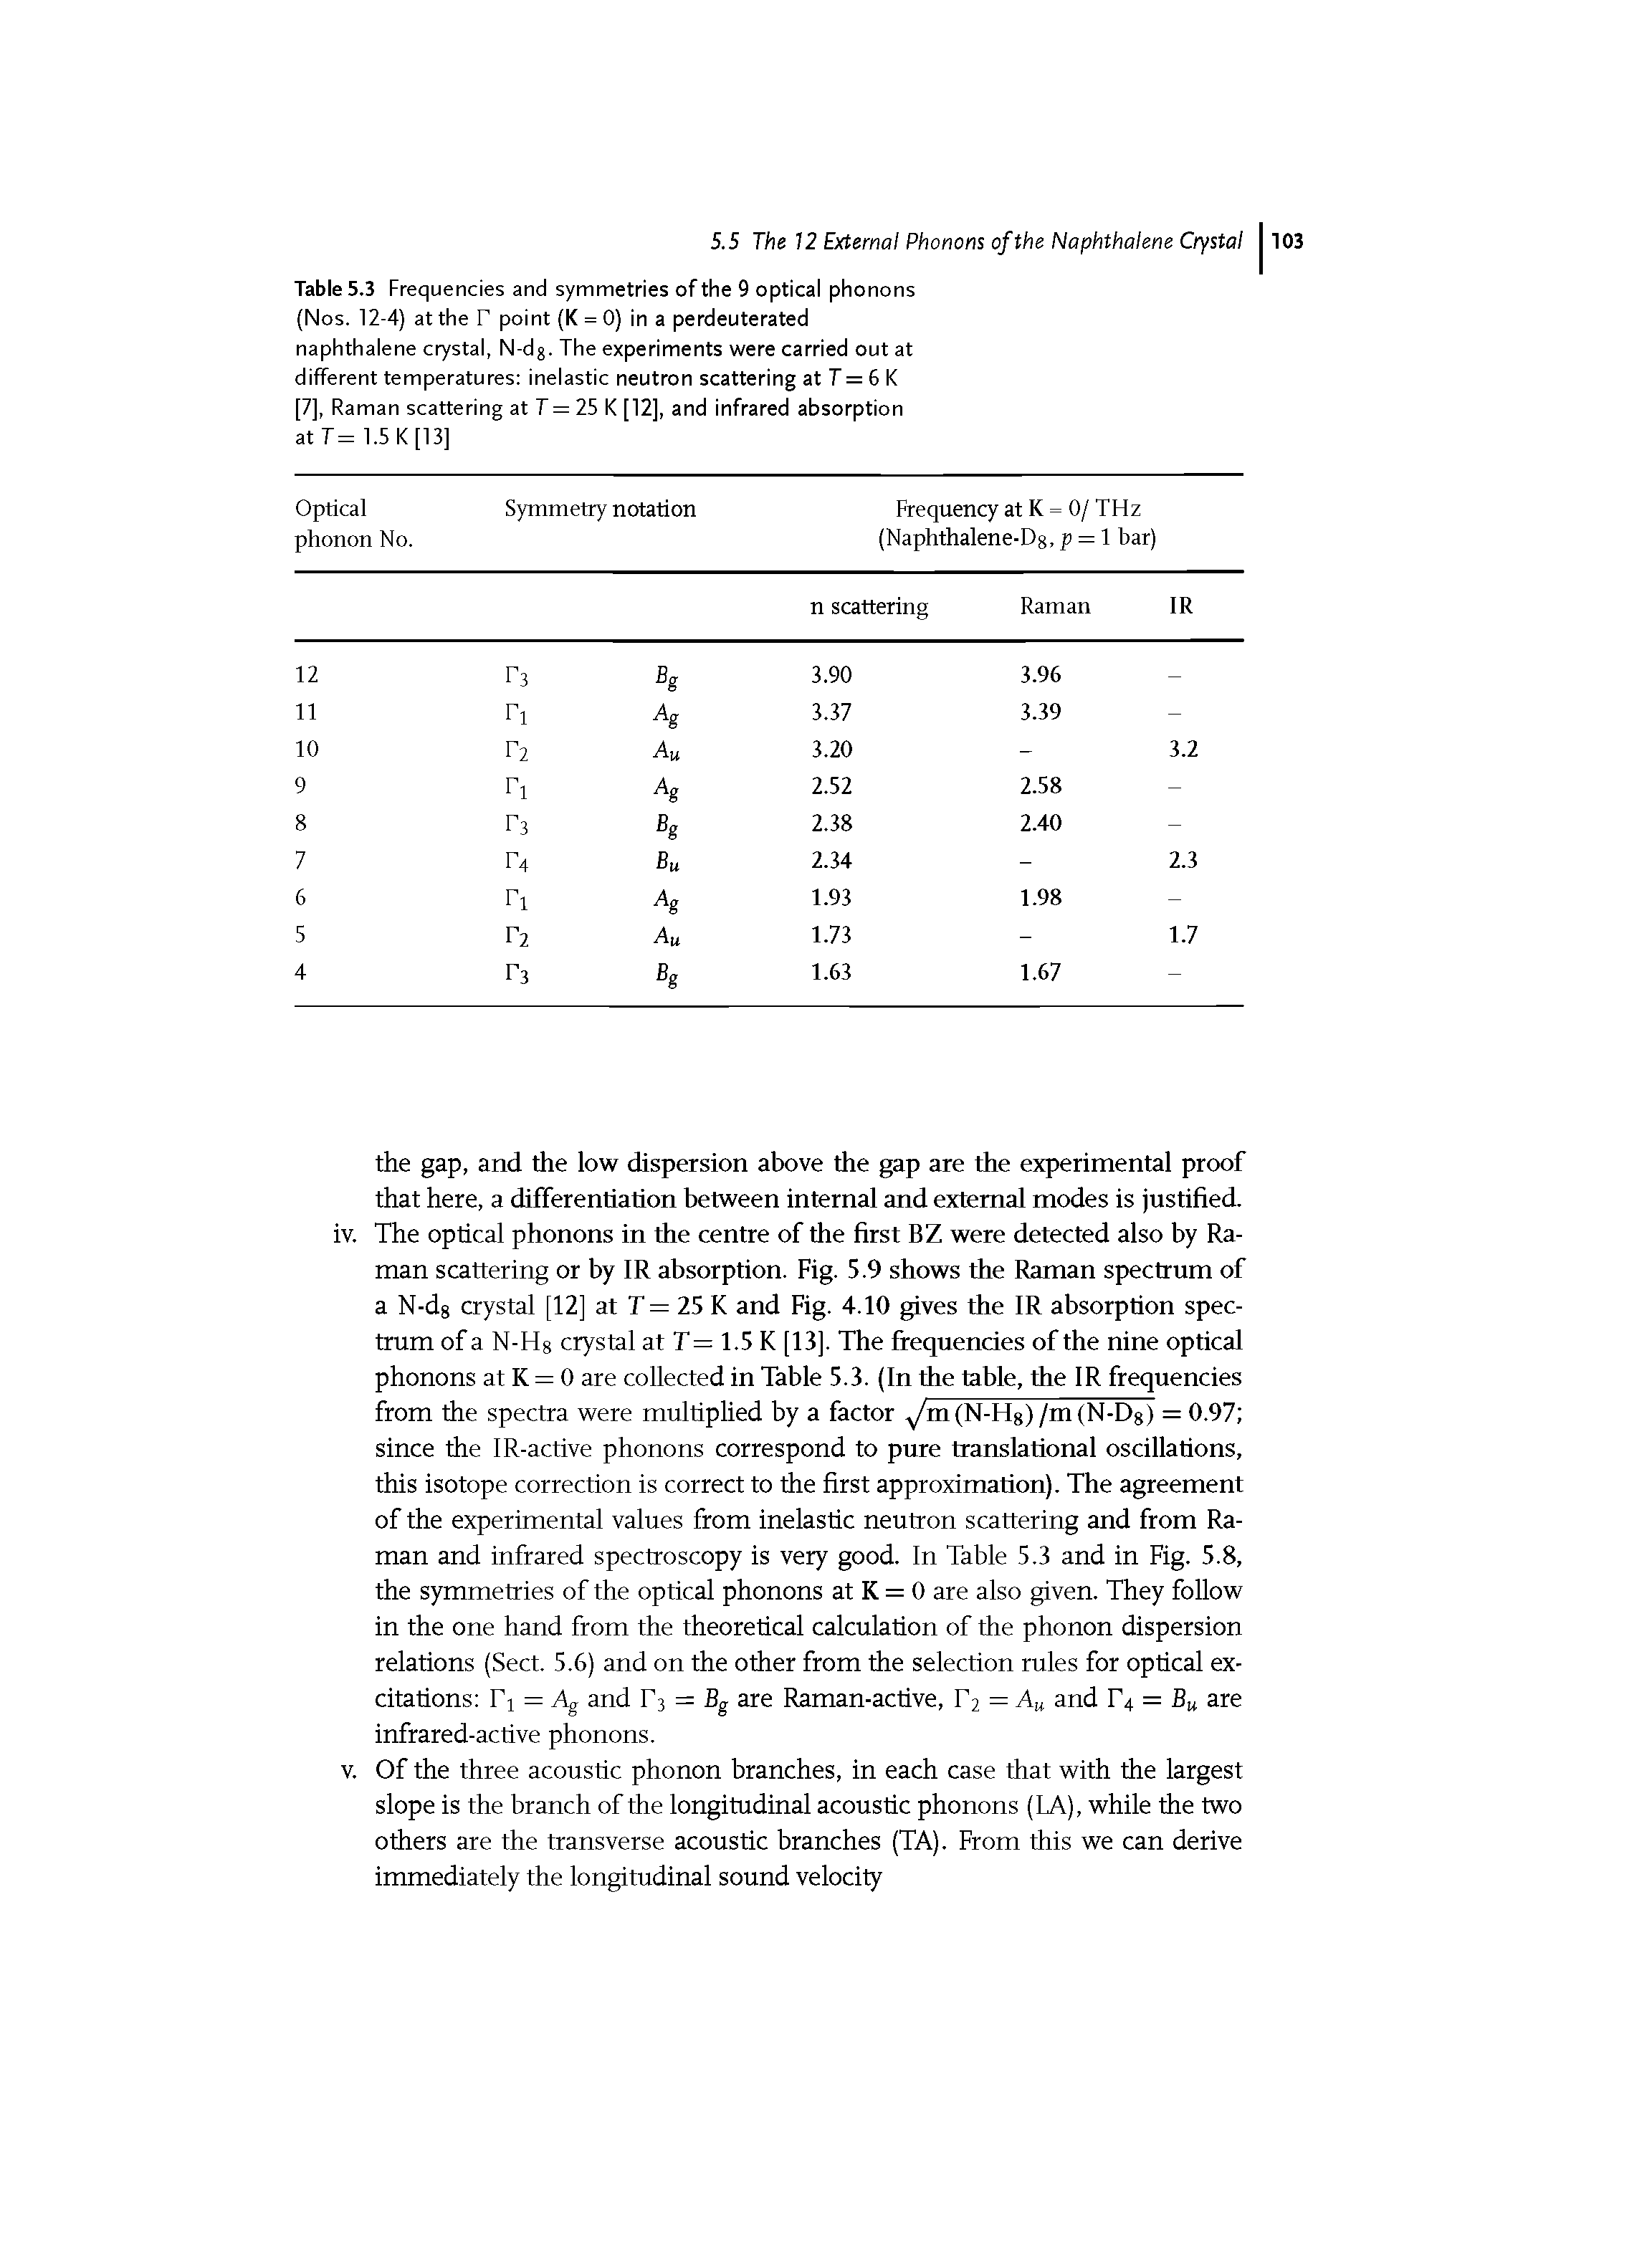 Table 5.3 Frequencies and symmetries of the 9 optical phonons (Nos. 12-4) at the P point (K = 0) in a perdeuterated naphthalene crystal, N-dg. The experiments were carried out at different temperatures inelastic neutron scattering at T= 6 K [7], Raman scattering at T = 25 K [12], and infrared absorption atT= 1.5 K [13]...